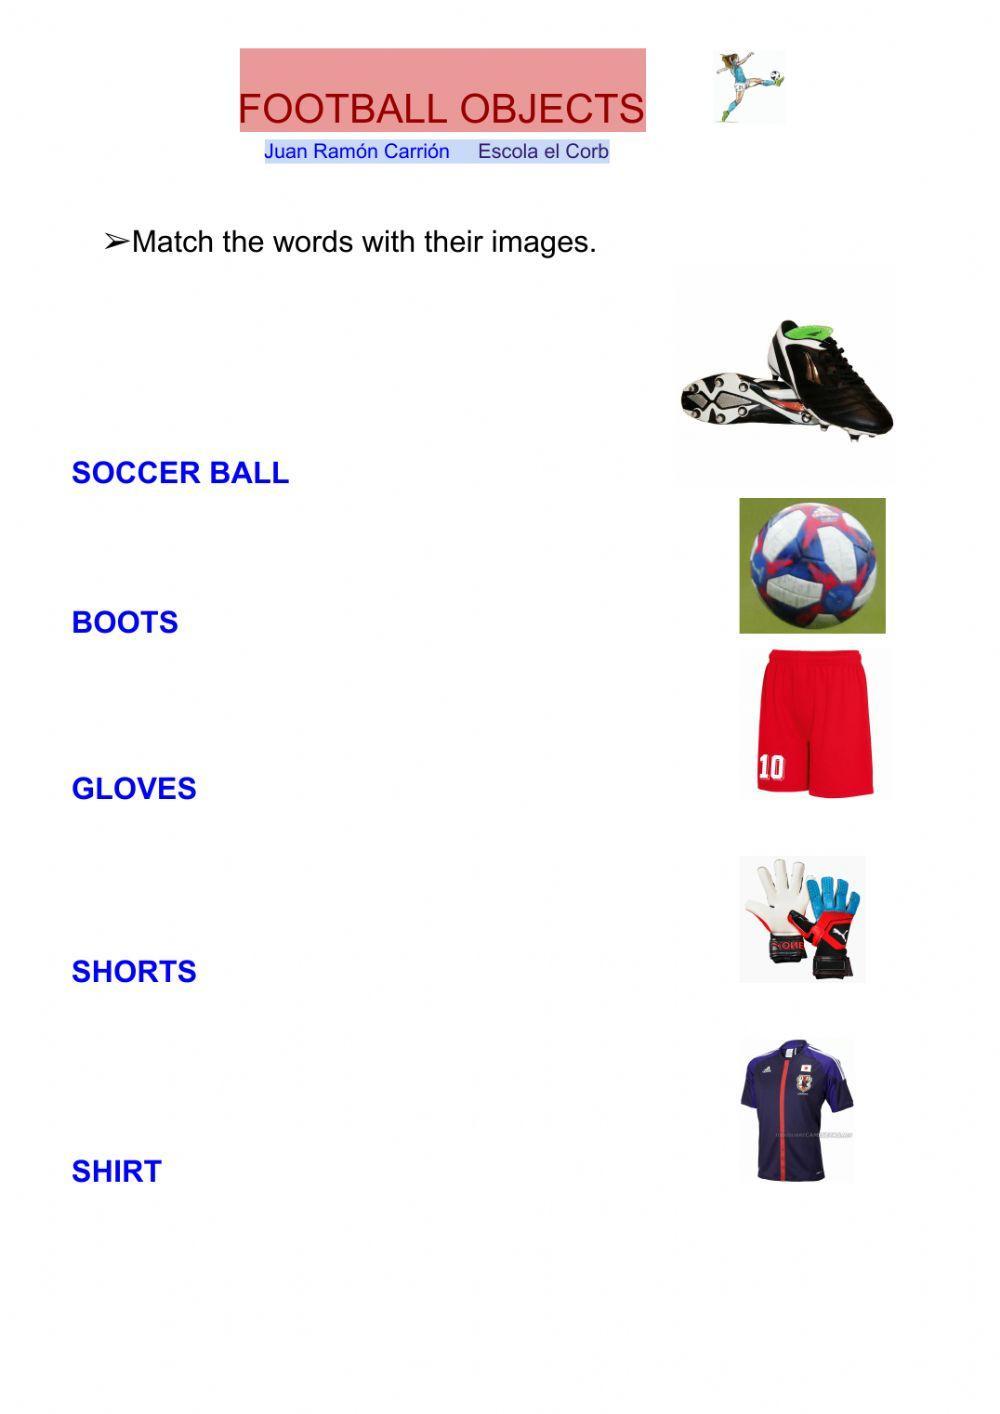 Football objects